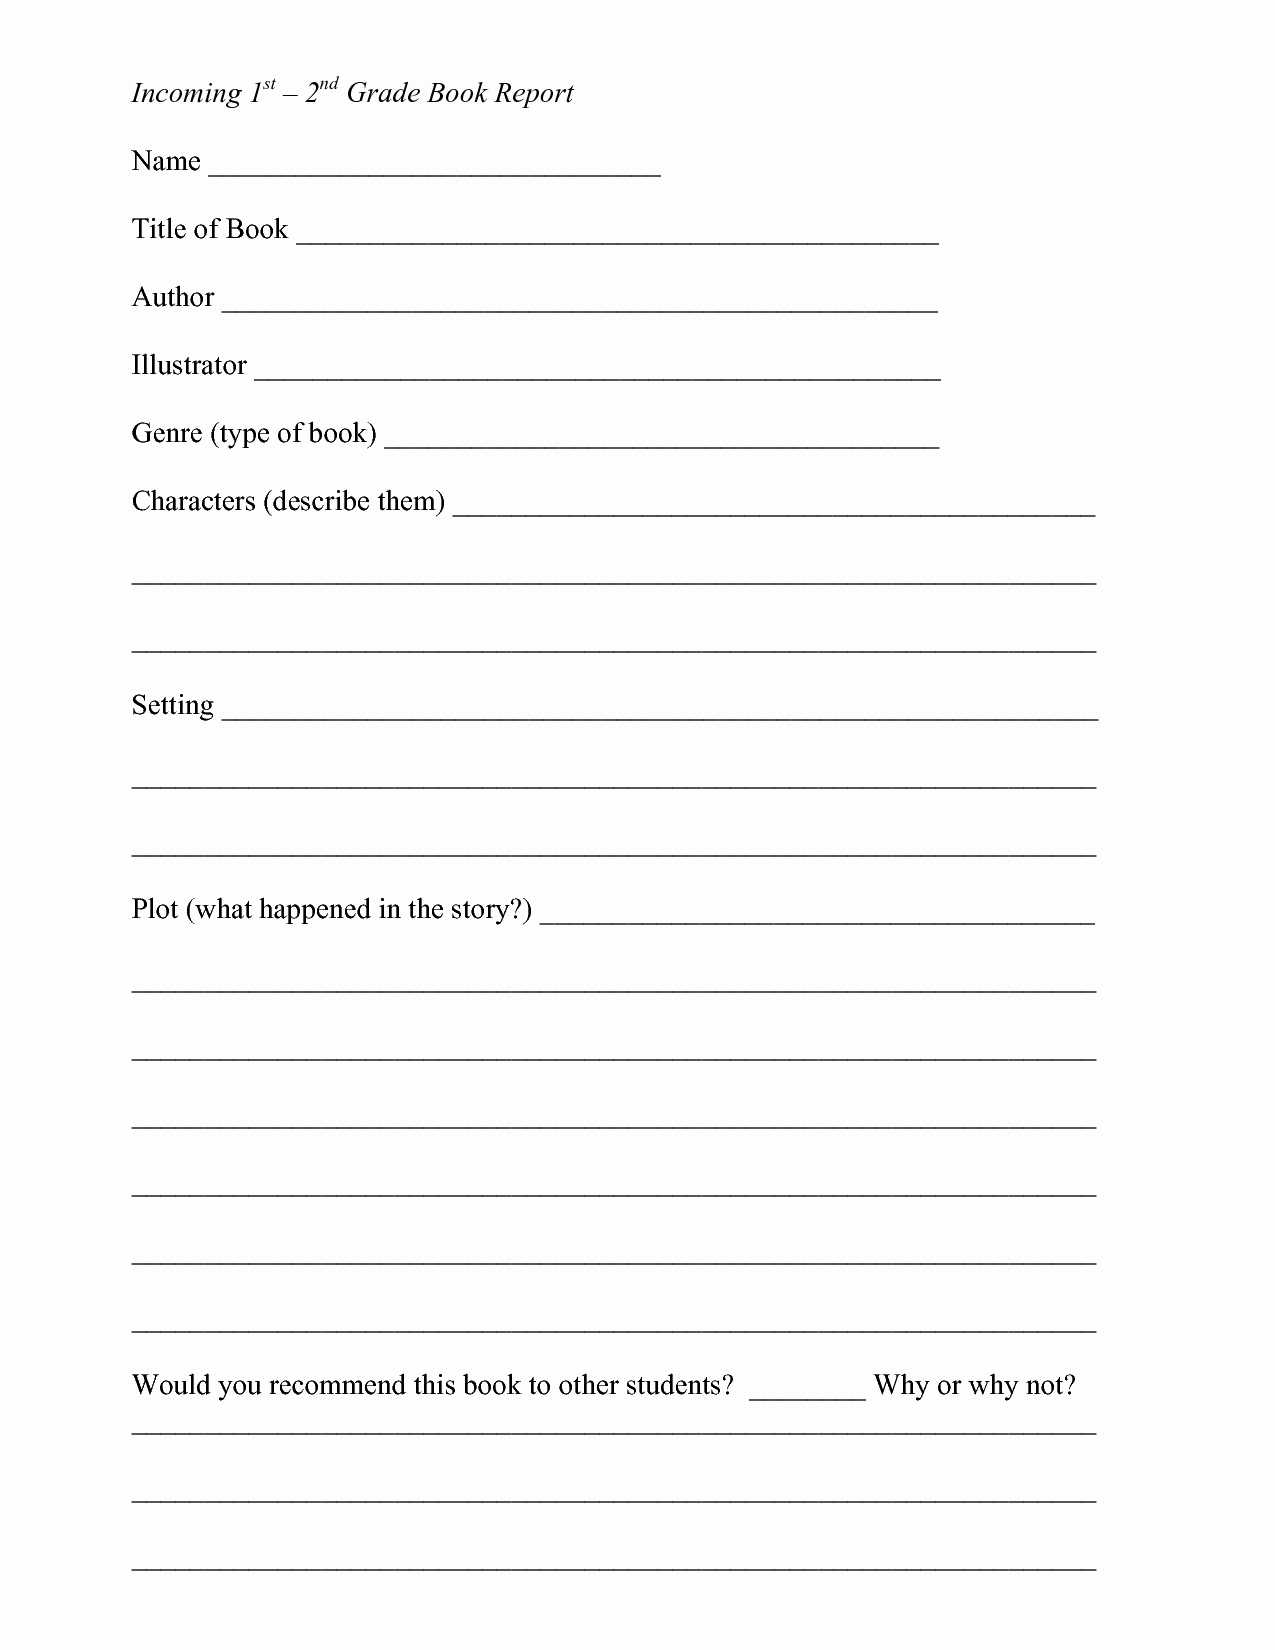 Fiction Book Report Template 6Th Grade For 7Th Graders Pdf Throughout 2Nd Grade Book Report Template